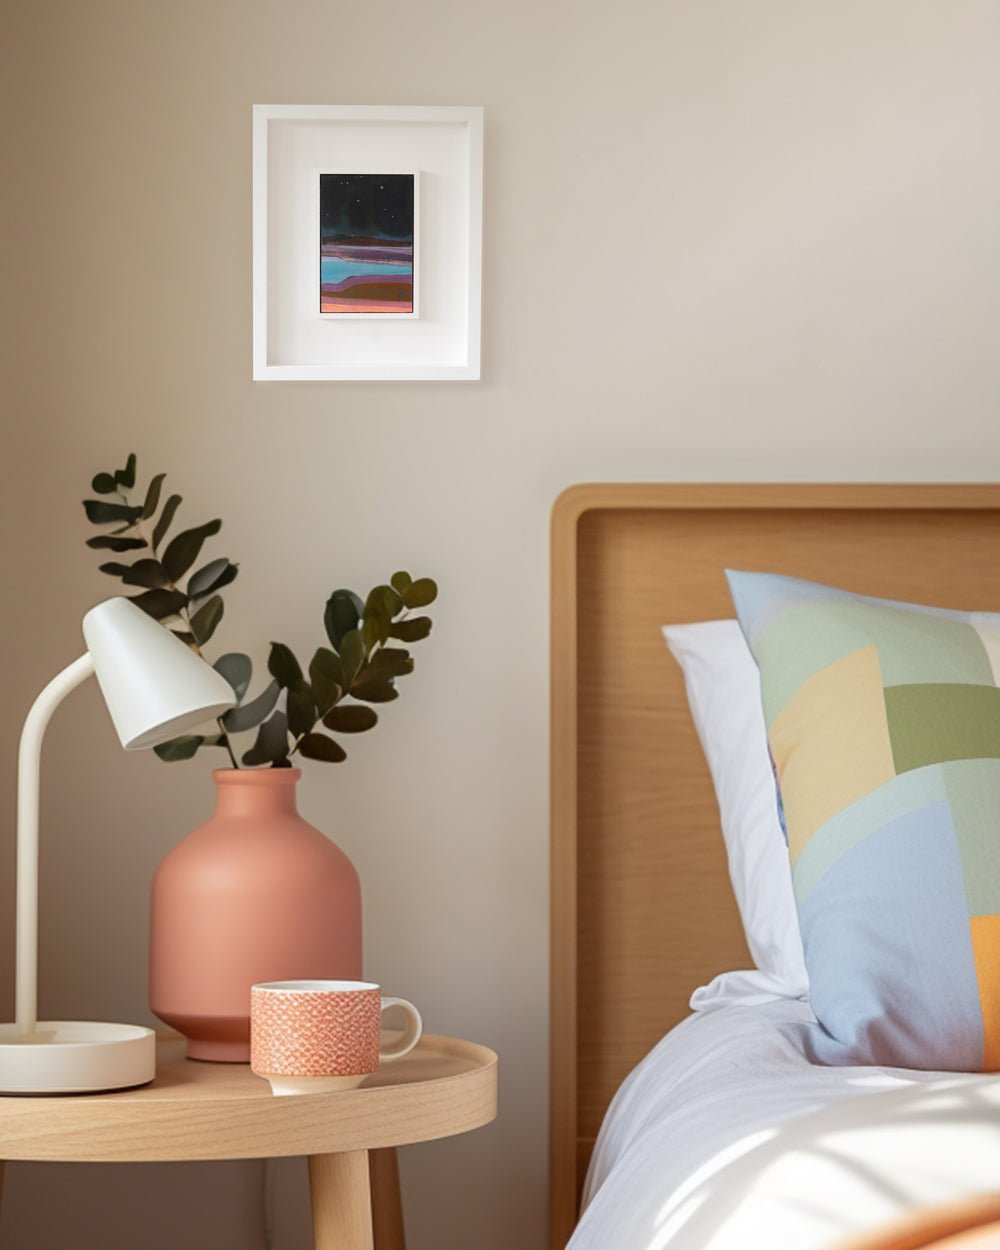 Missoni Night abstract looks beautiful in this bedroom setting